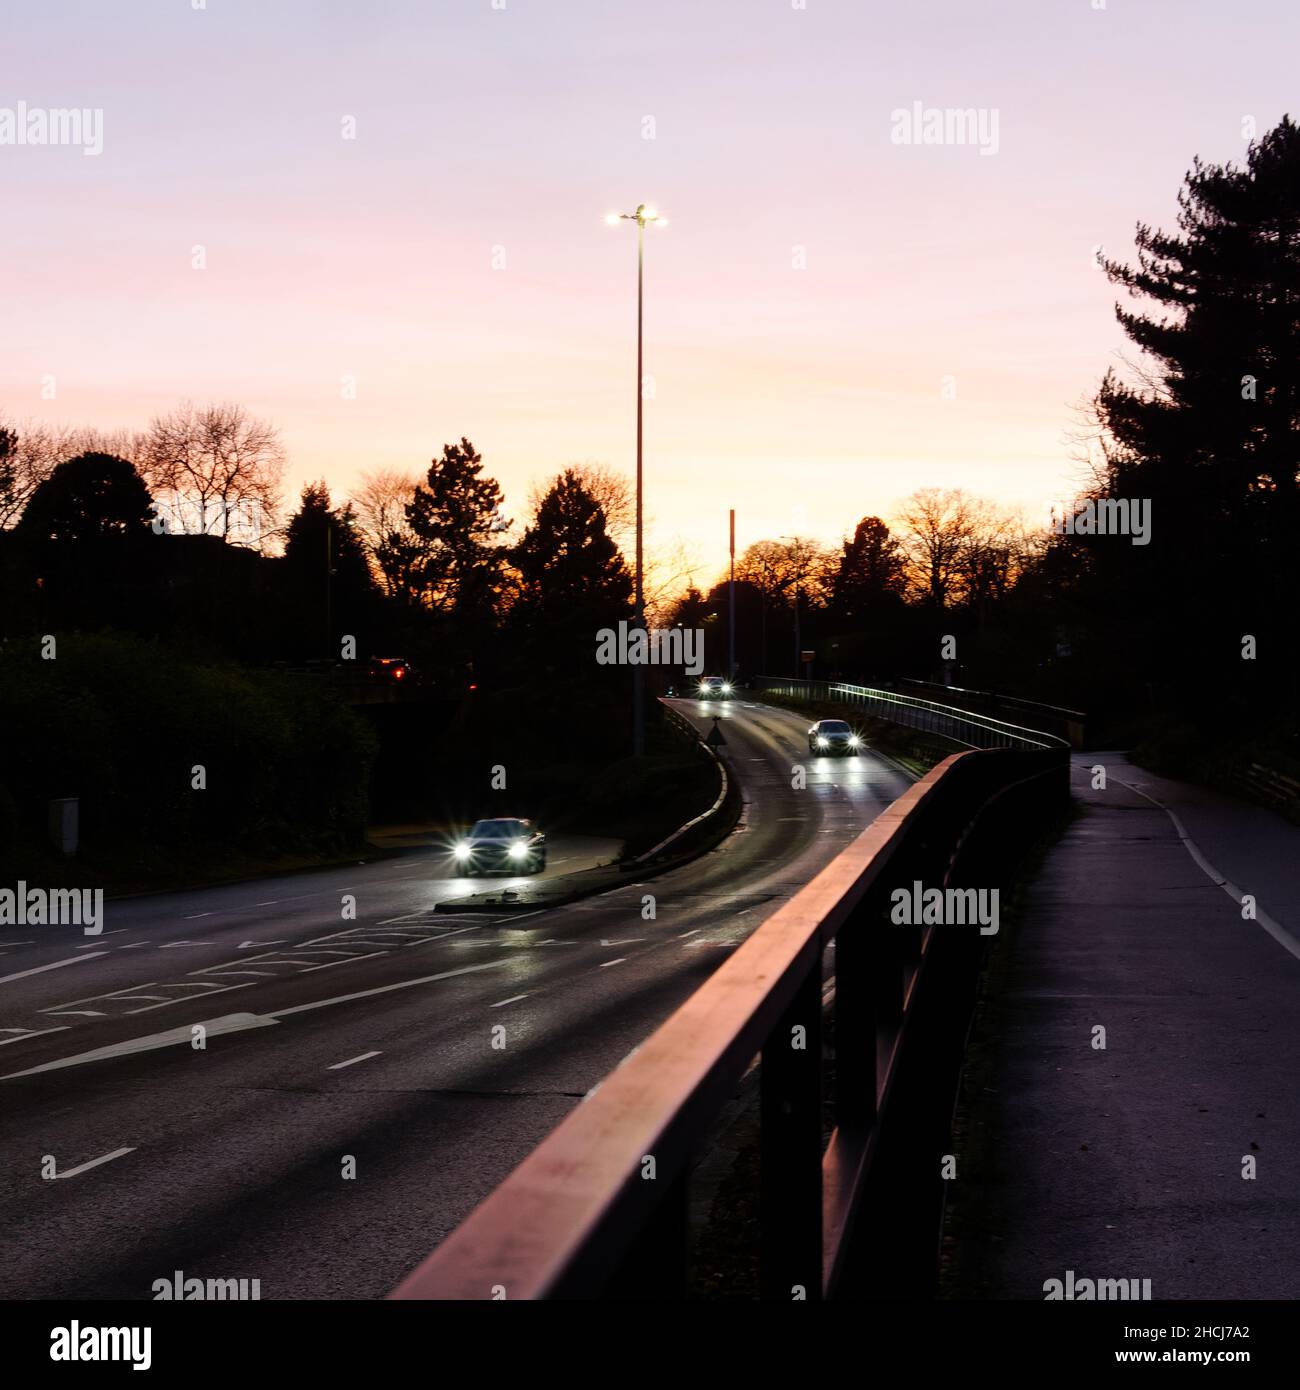 Cars driving on a slip road with lights on which form starbursts as the sun sets behind and reflects on the roadside barrier. Stock Photo